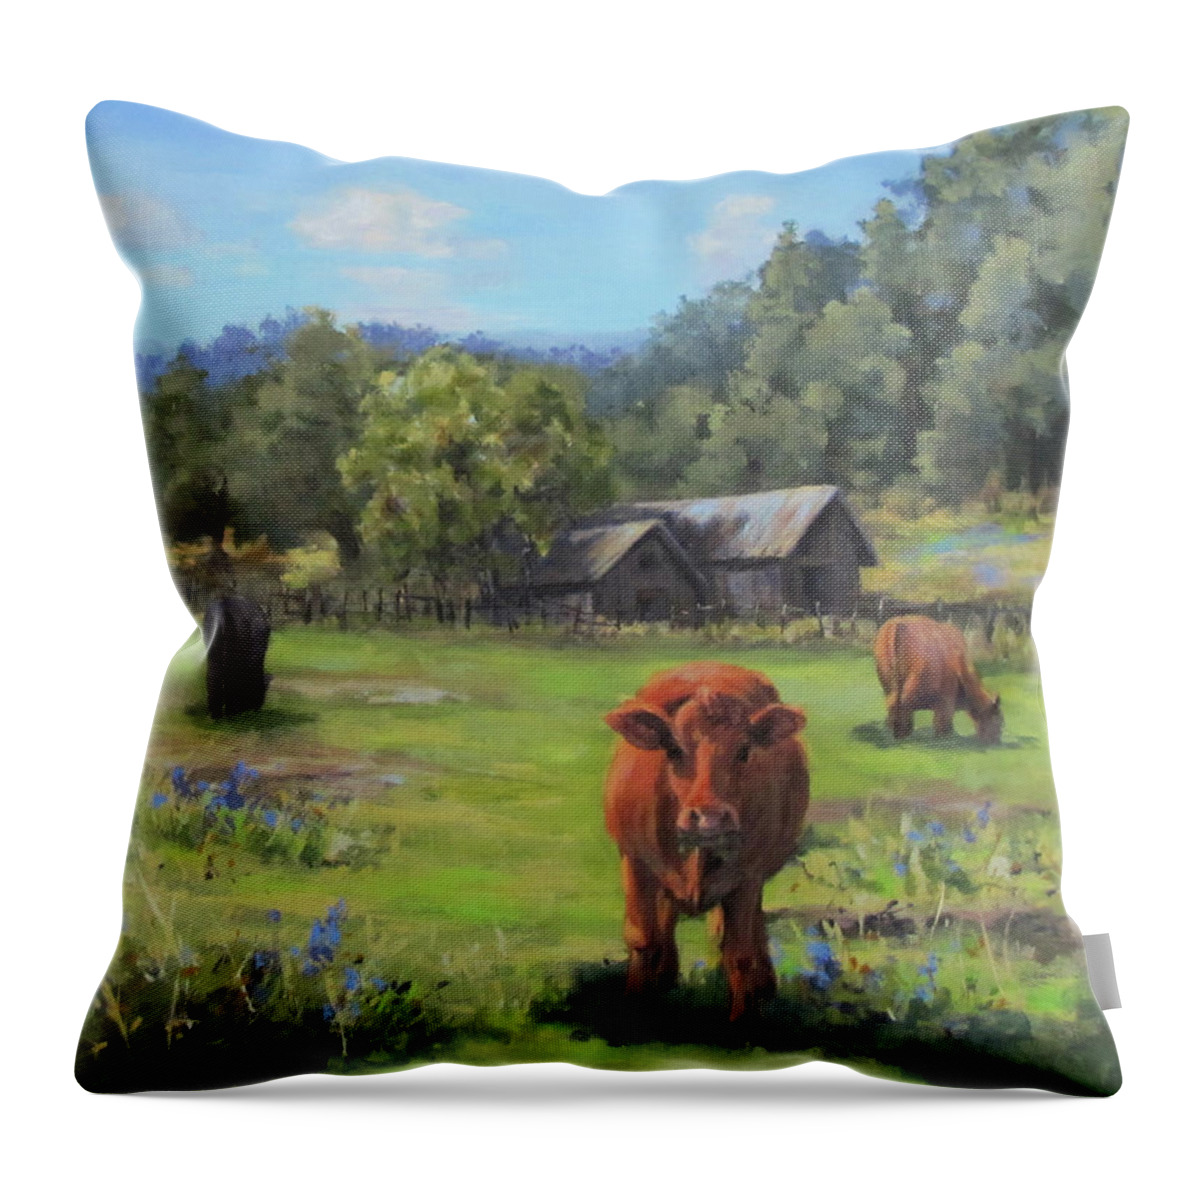 Rural Throw Pillow featuring the painting Afternoon Snack by Karen Ilari